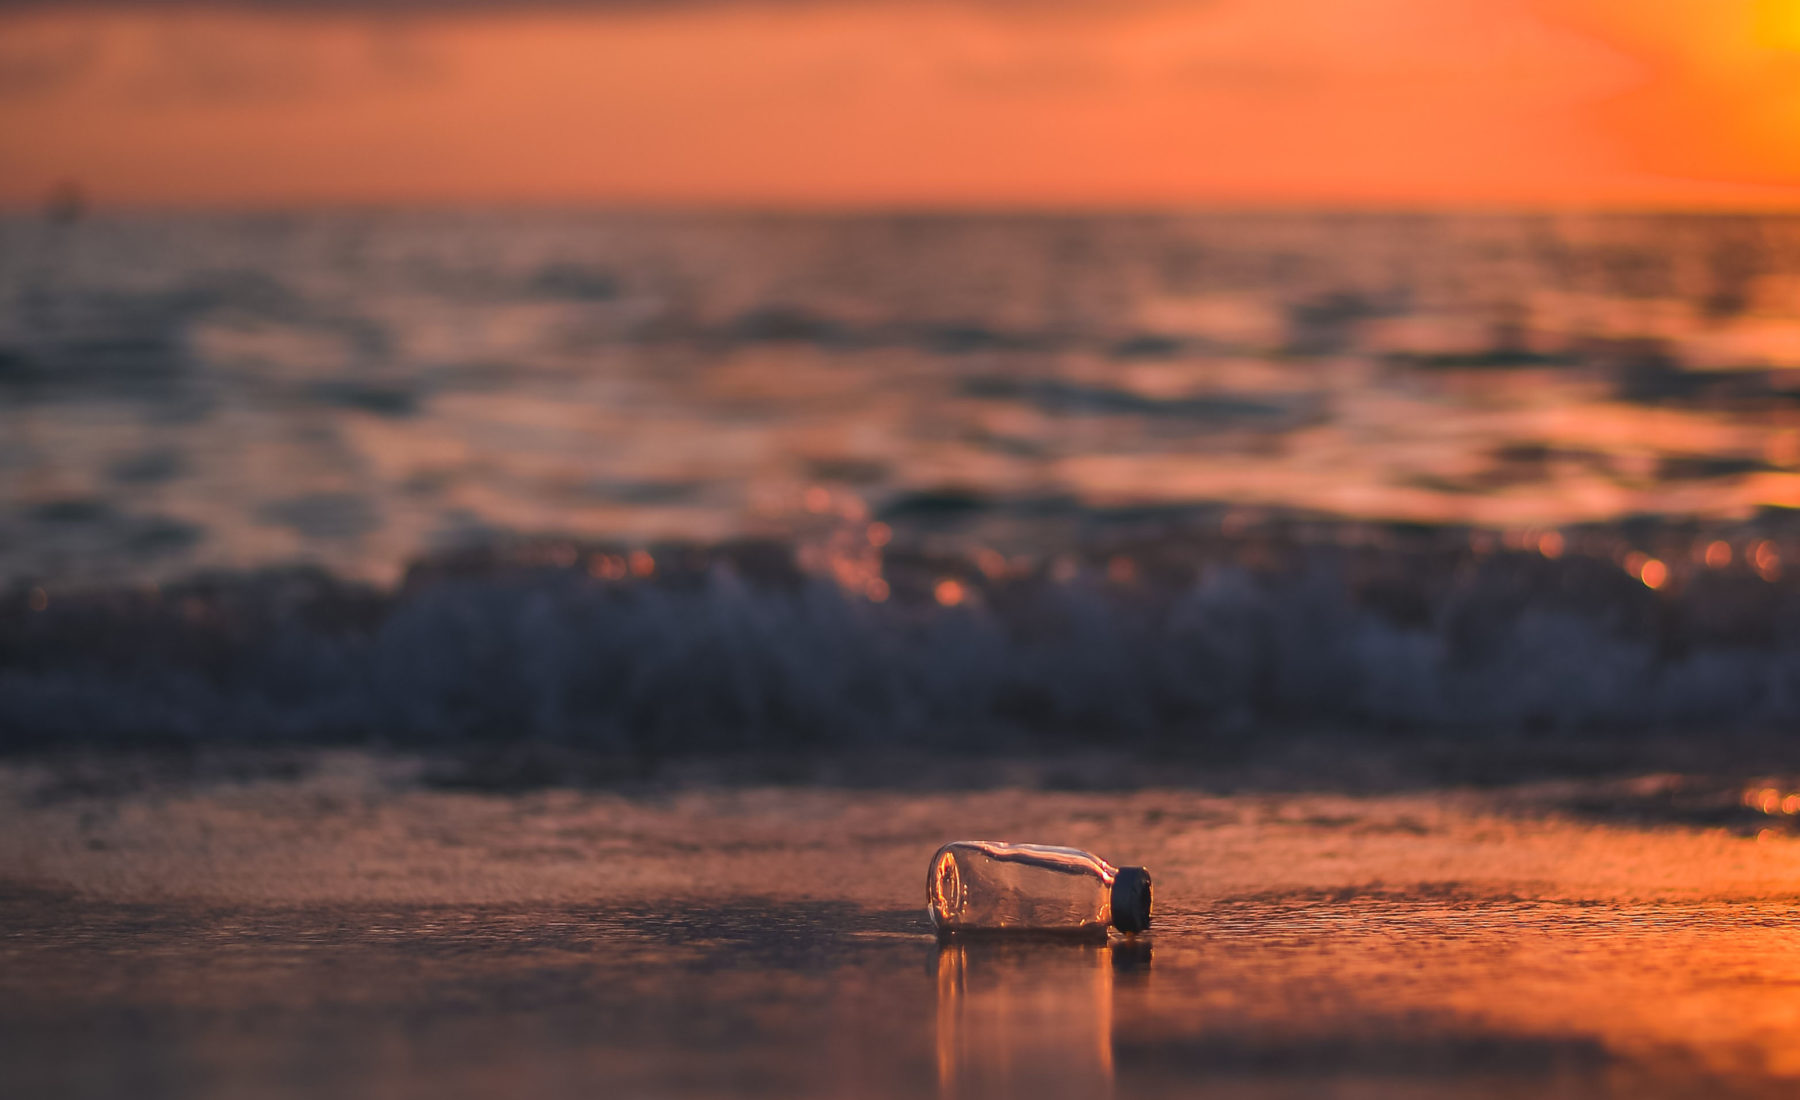 A lone water bottle on the beach with the sun setting in the background.